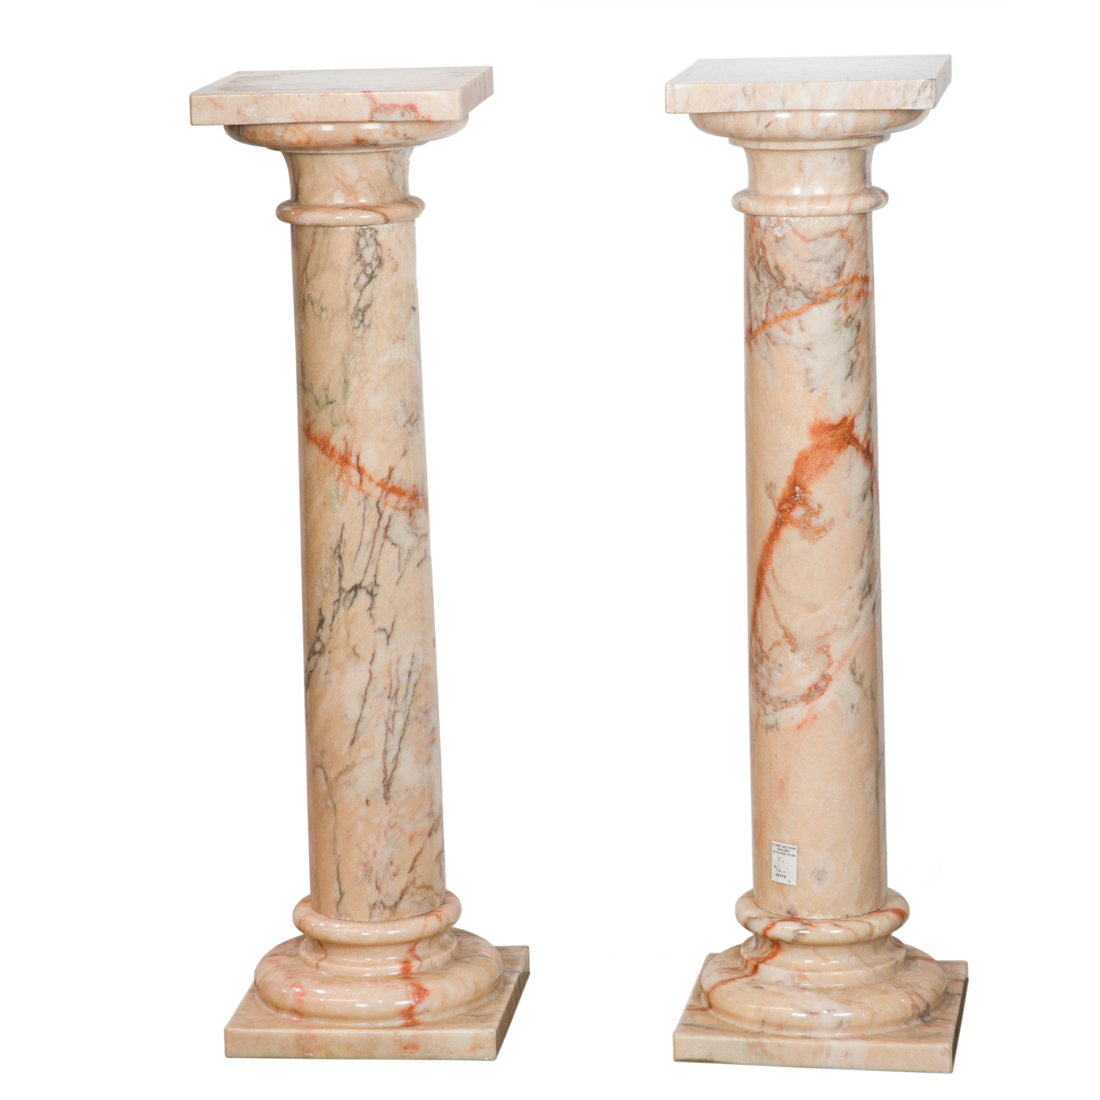 A PAIR OF CLASSICAL STYLE APRICOT